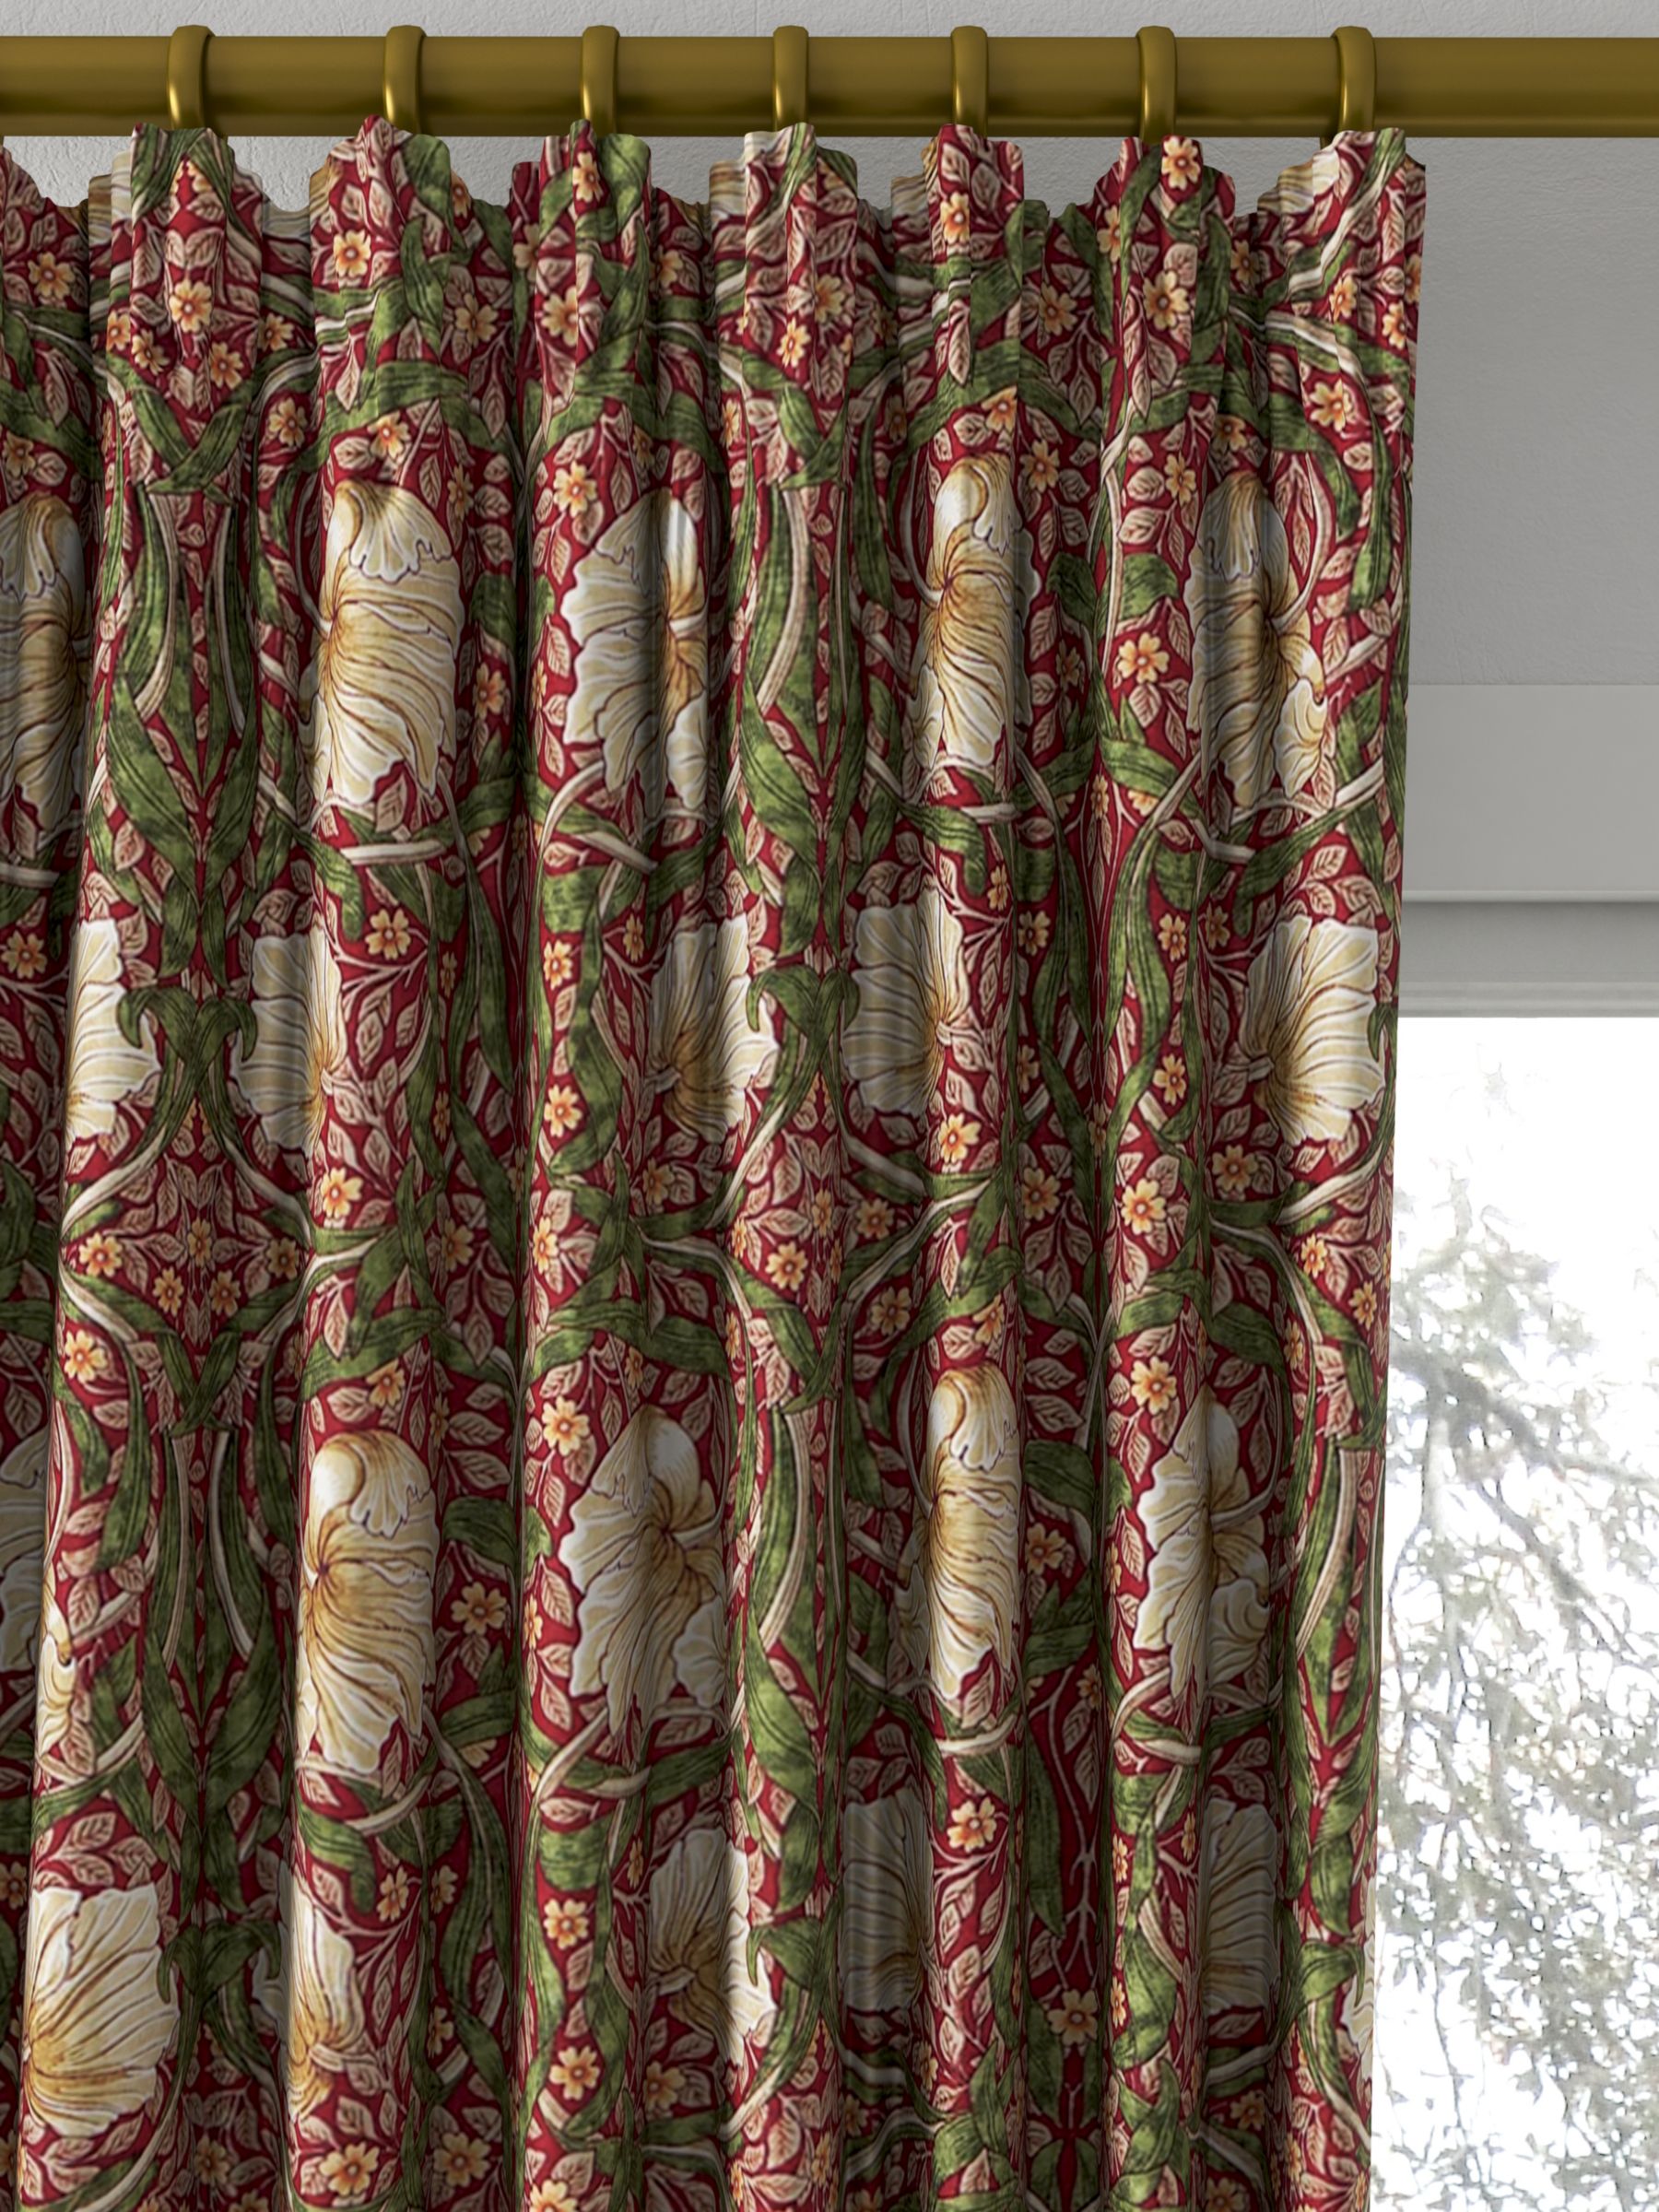 Morris & Co. Pimpernel Print Made to Measure Curtains, Red/Thyme